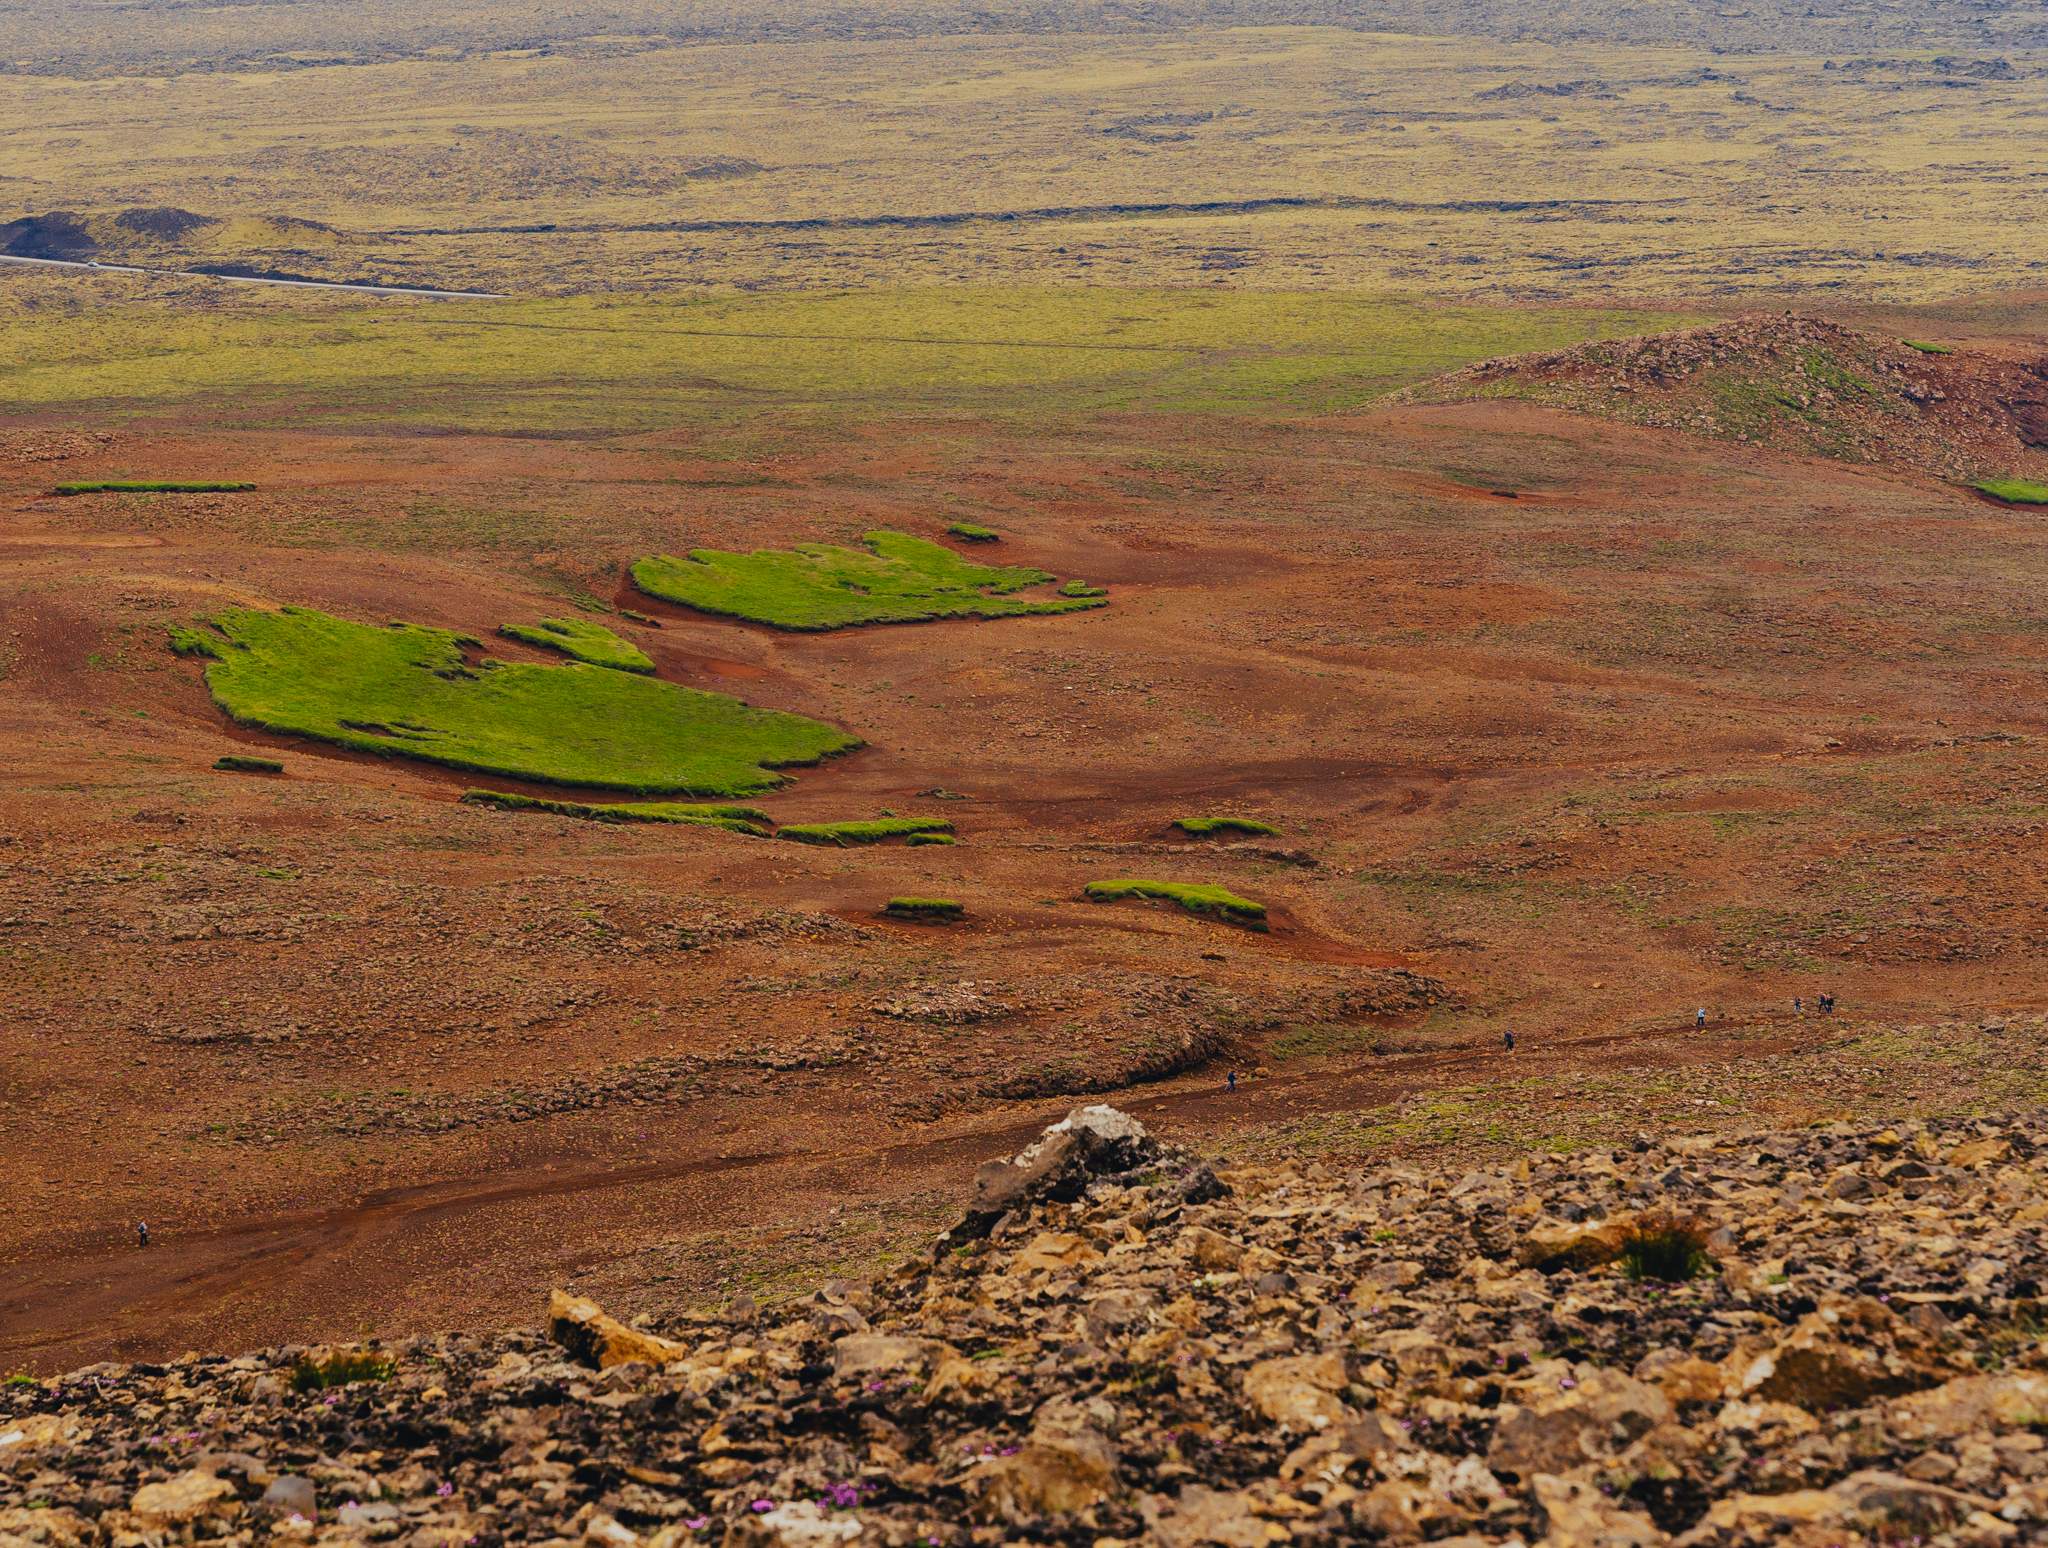 Green patches of foliage appearing on arid land